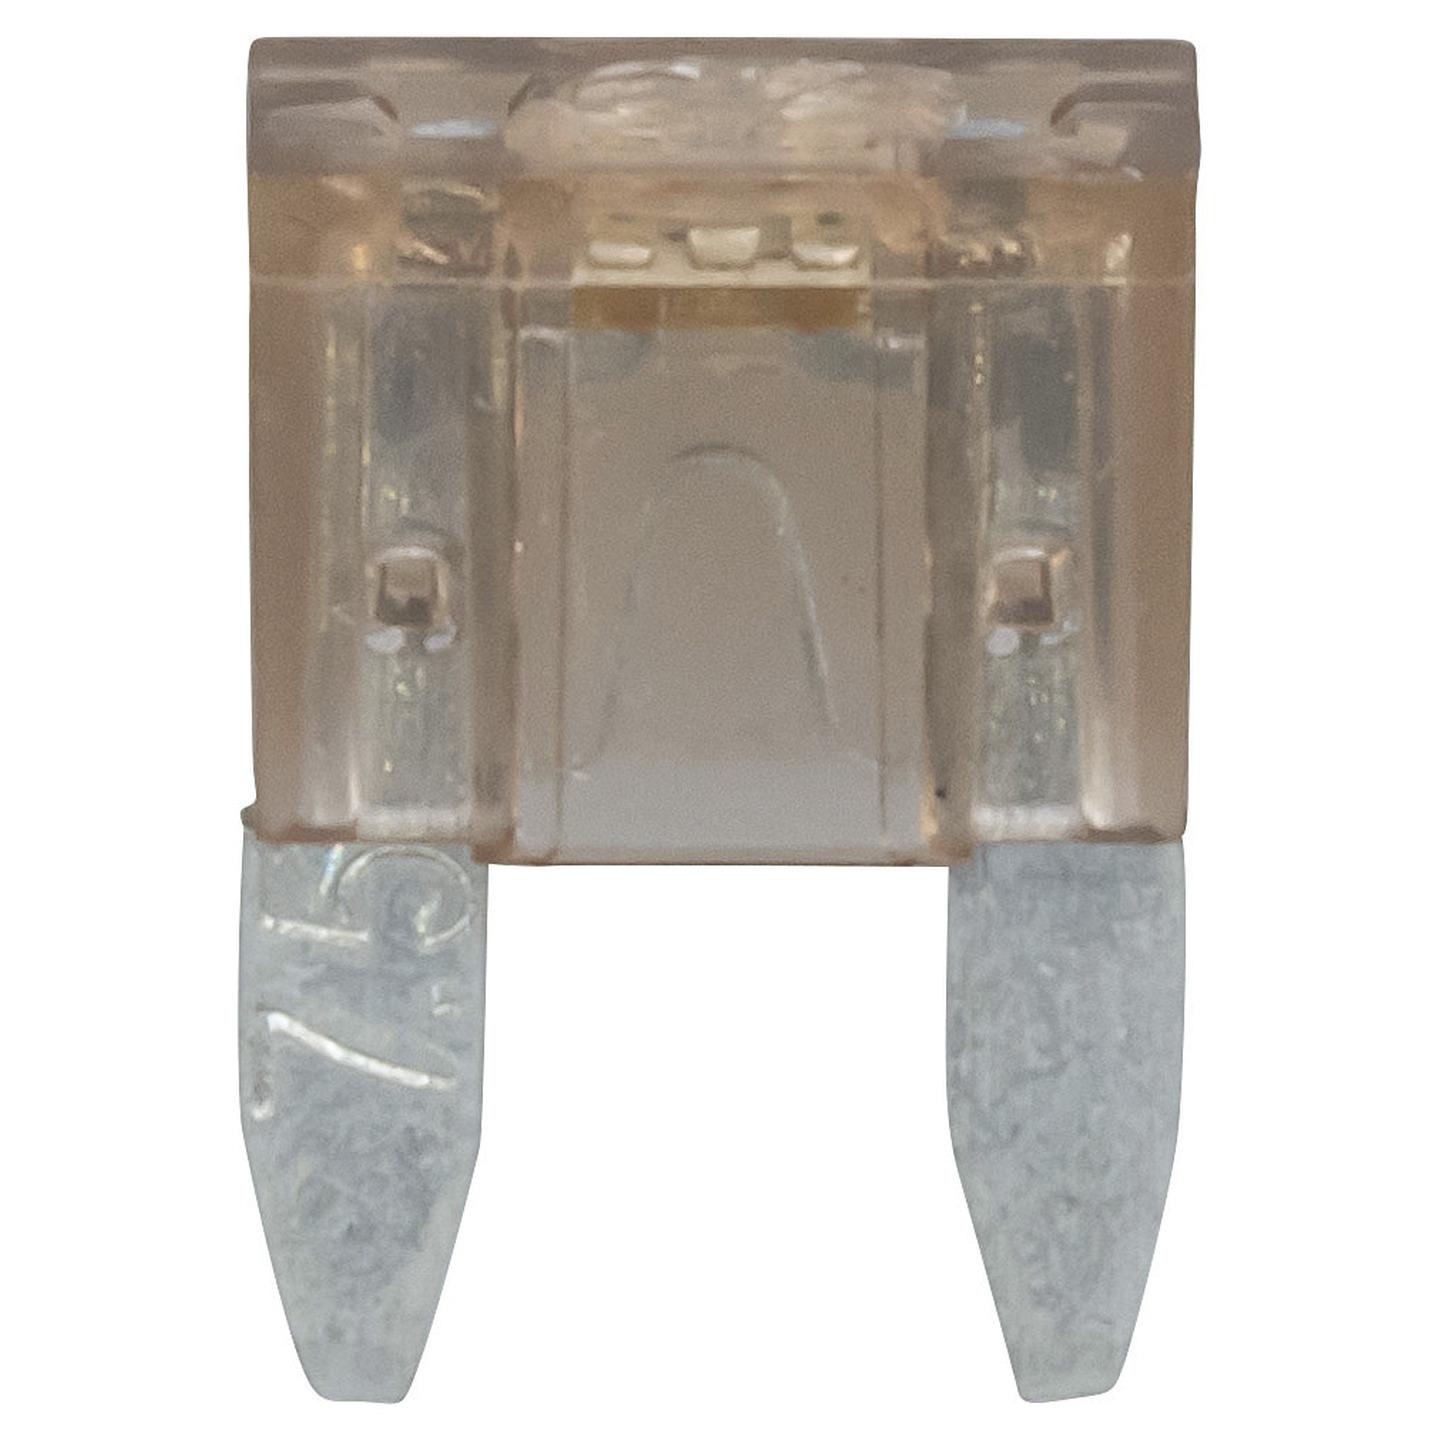 7.5A Brown Mini Blade Fuse with LED Indicator